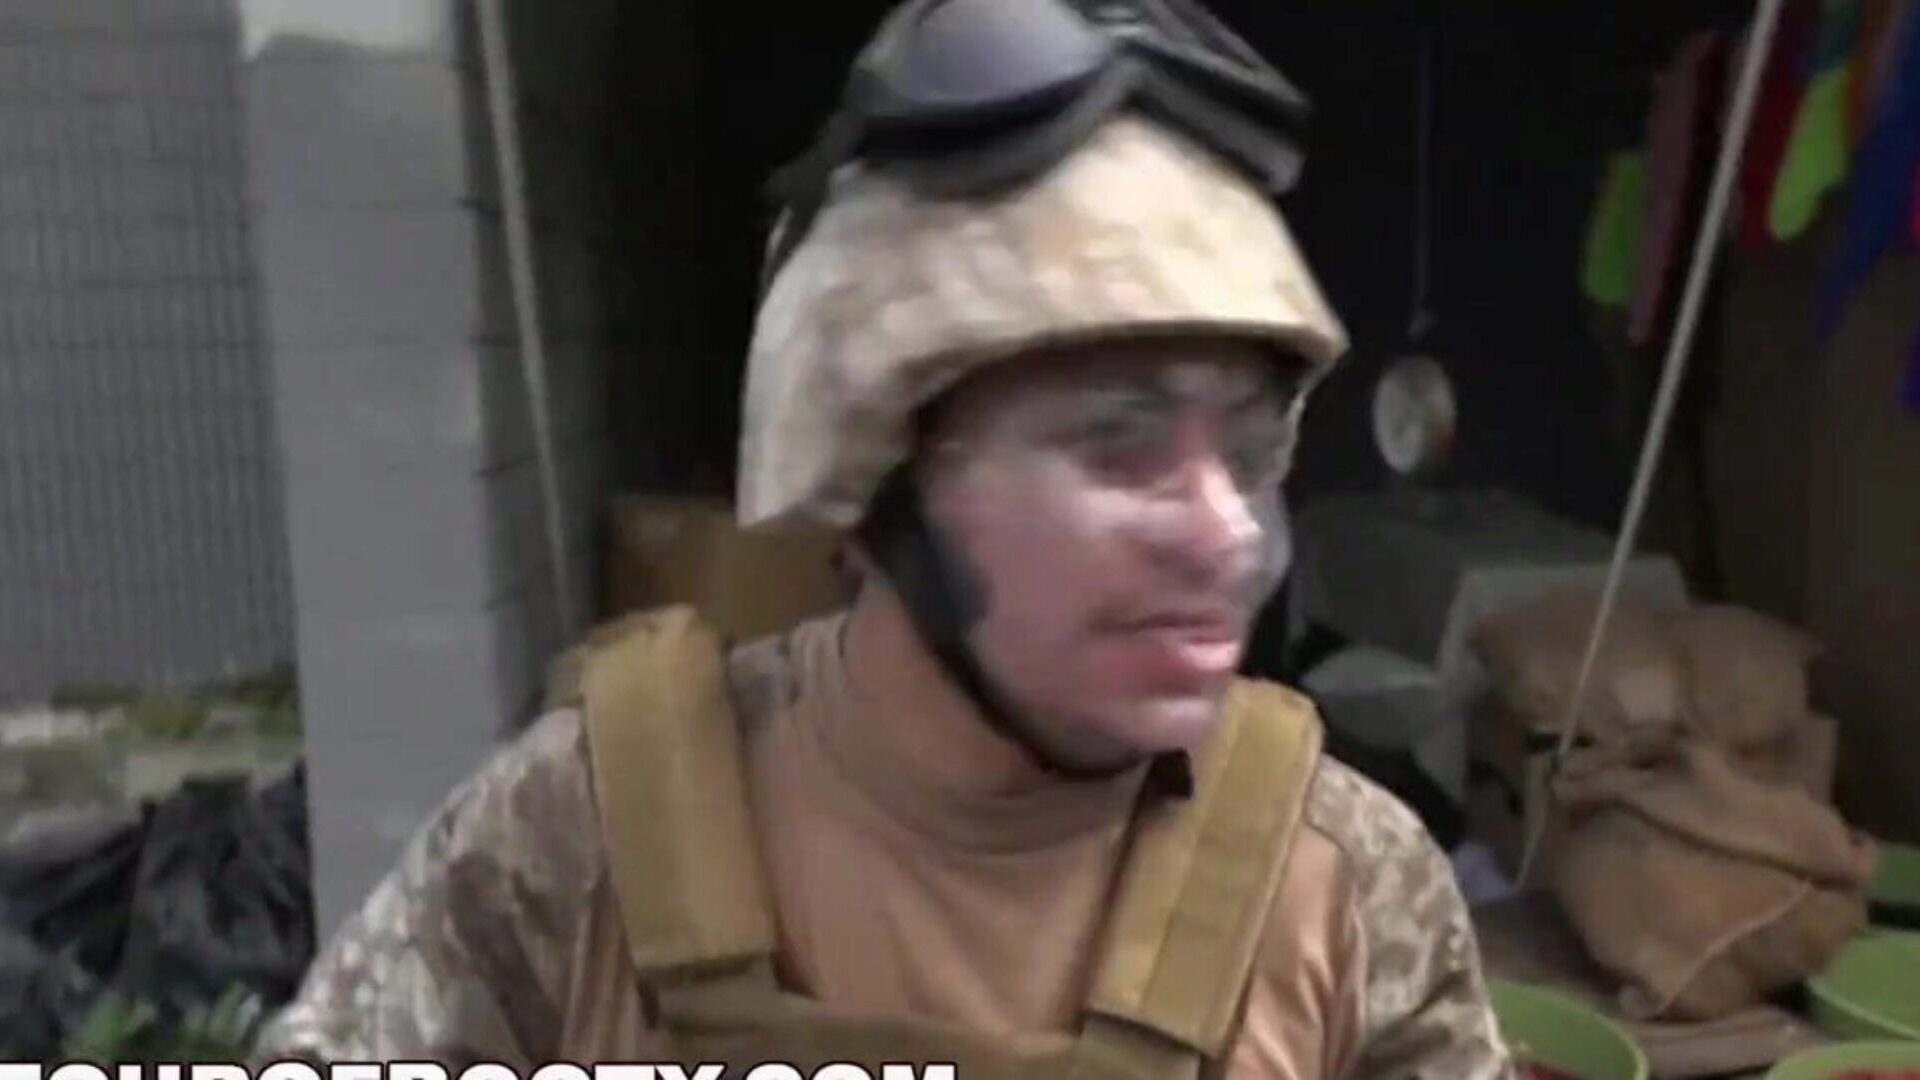 Tour of Booty - Operation Pussy Run With Soldiers in the Middle East! - Free Porn Videos - YouPorn Watch TOUR OF BOOTY - Operation Pussy Run with Soldiers In The Middle East! online on YouPorn.com. YouPorn is the fattest HD porn movie scene site with the best selection of free-for-all high quality soldiers episodes Enjoy our HD porn episodes on any implement of your choosing!